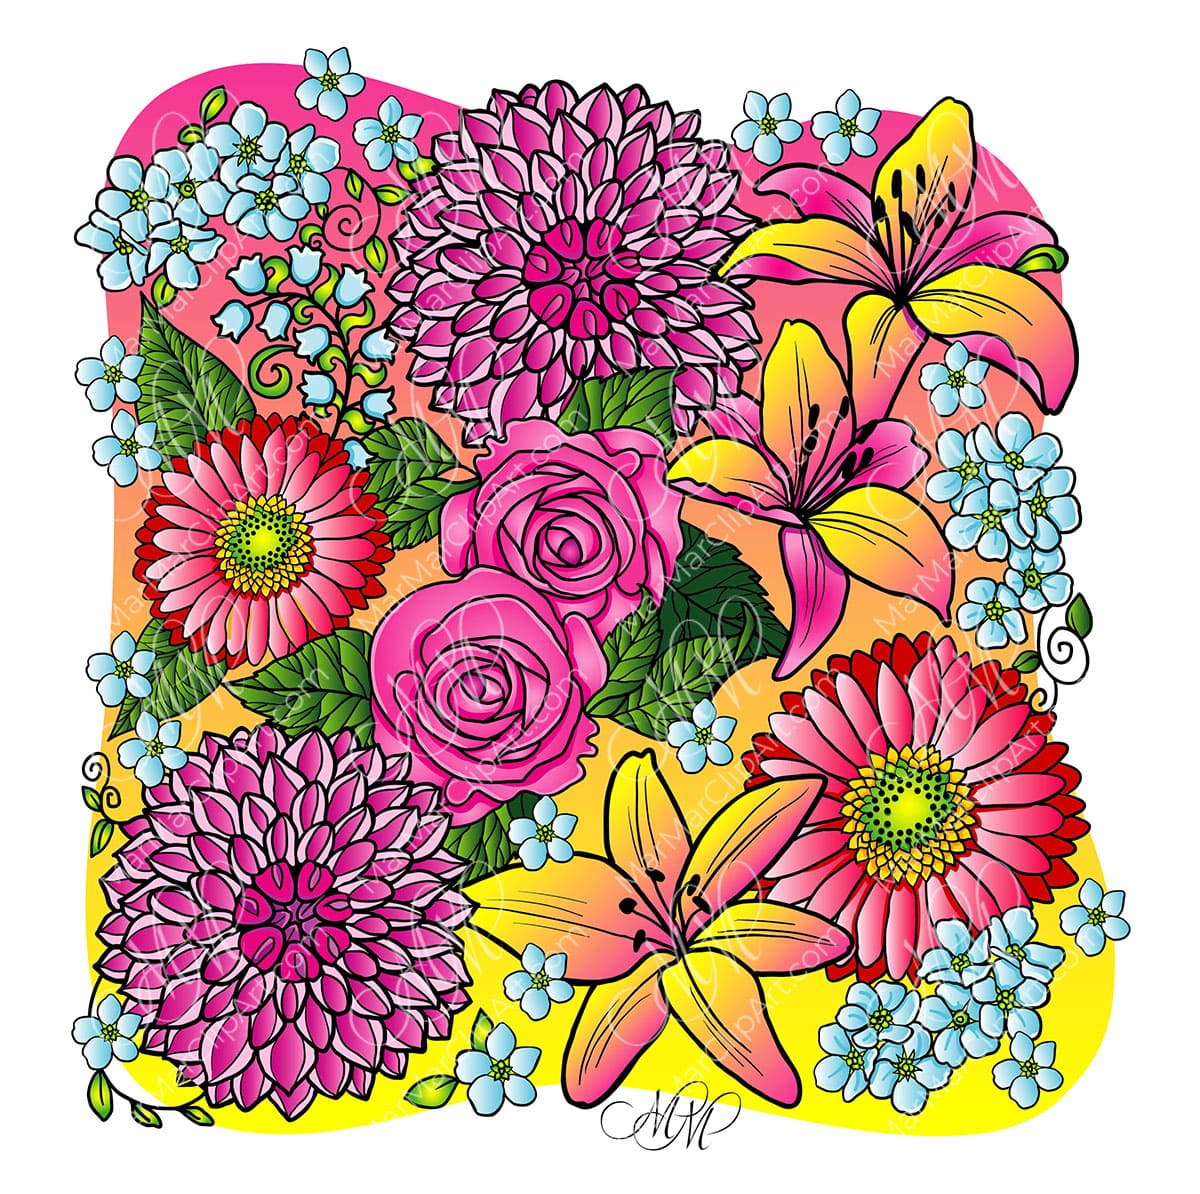 Blooming flowers background vector illustration